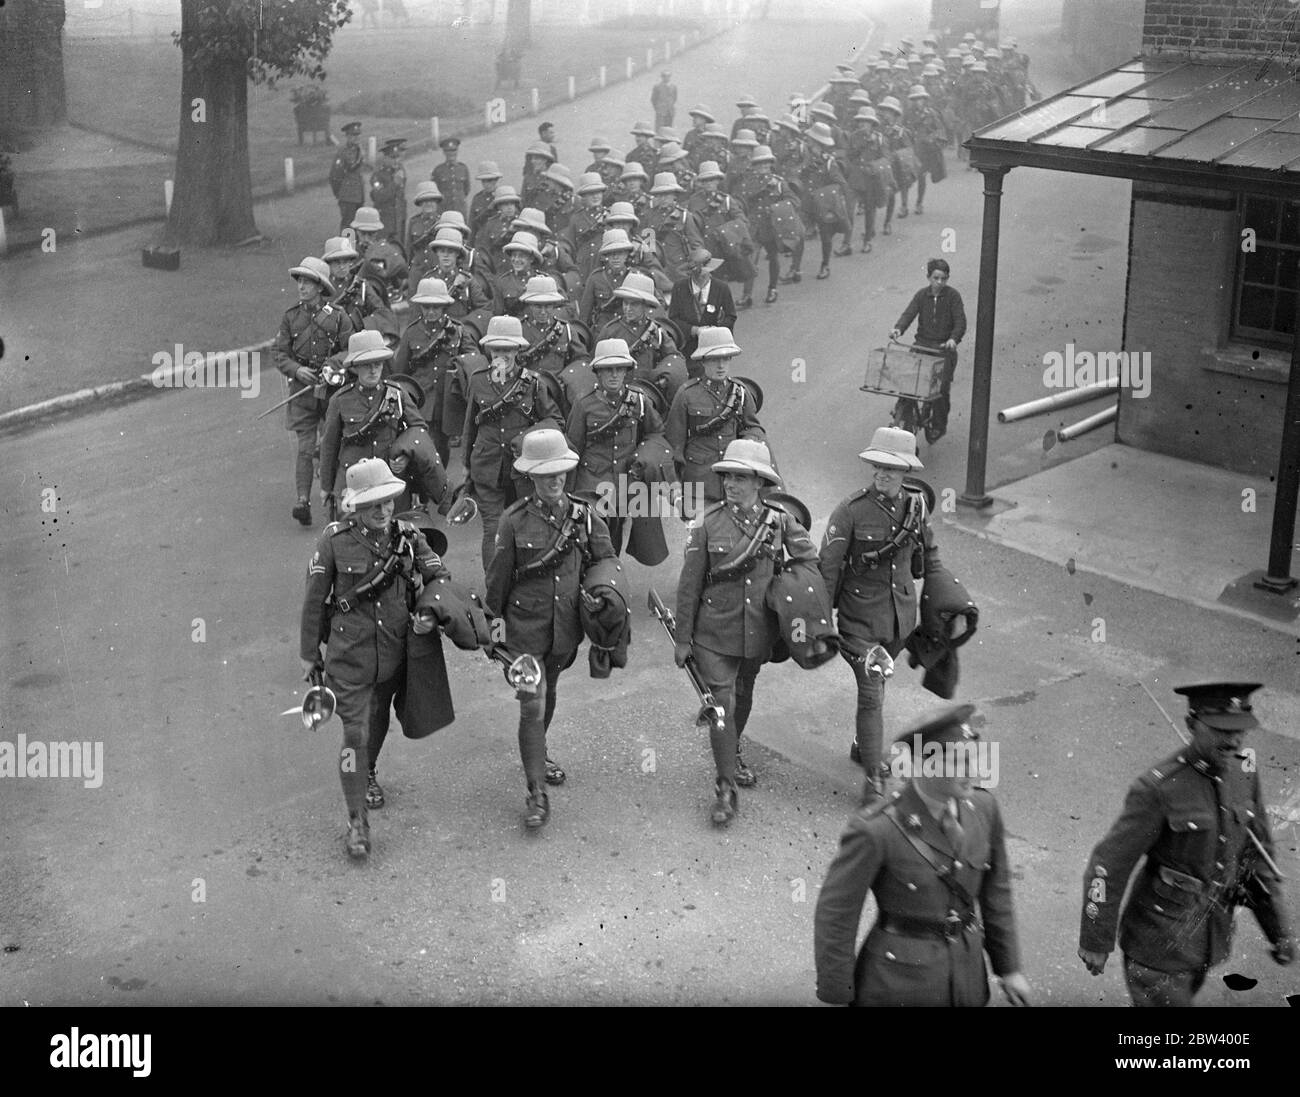 3rd carabiners inspected before leaving Hounslow for India . The 3 Carabiners ( C Squadron ) left Hounslow barracks to go to India . Inspection at the parade before departure was made by Major Shepley - Sheply . Photo shows , men of the 3 Carabiniers leaving Hounslow barracks wearing sun helmets. 23 September 1936 Stock Photo